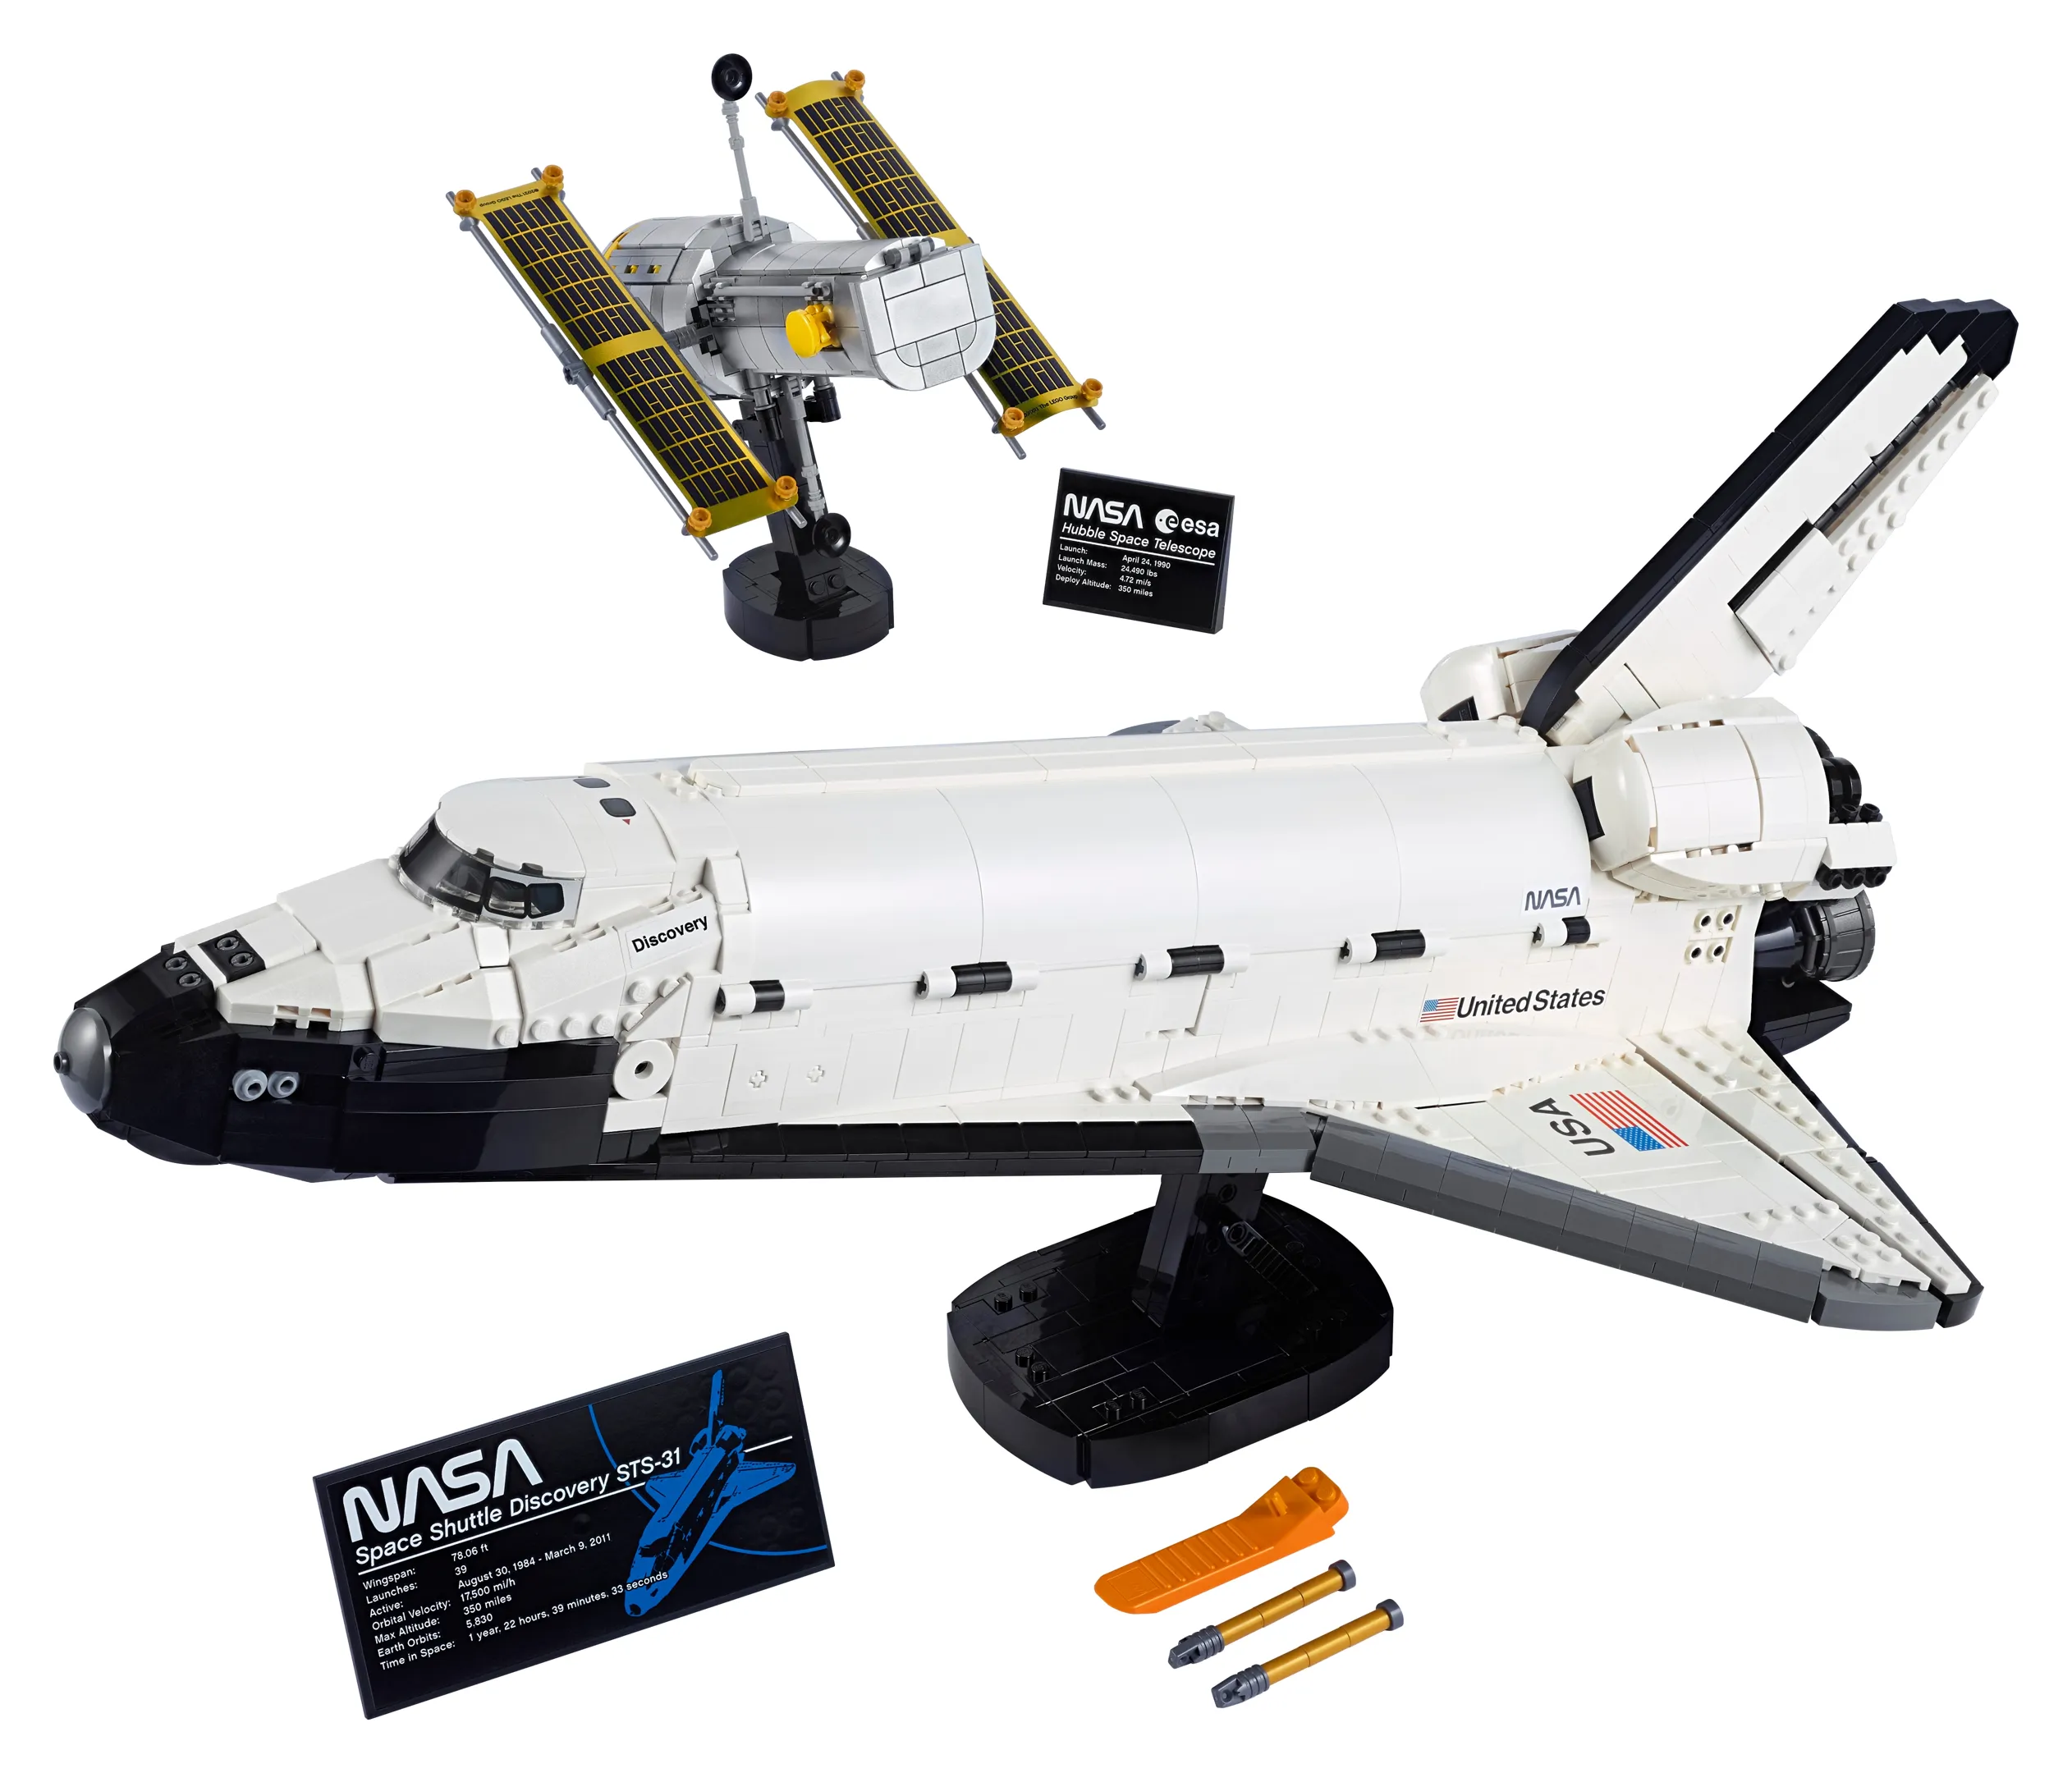 Icons NASA-Spaceshuttle „Discovery“ Gallery